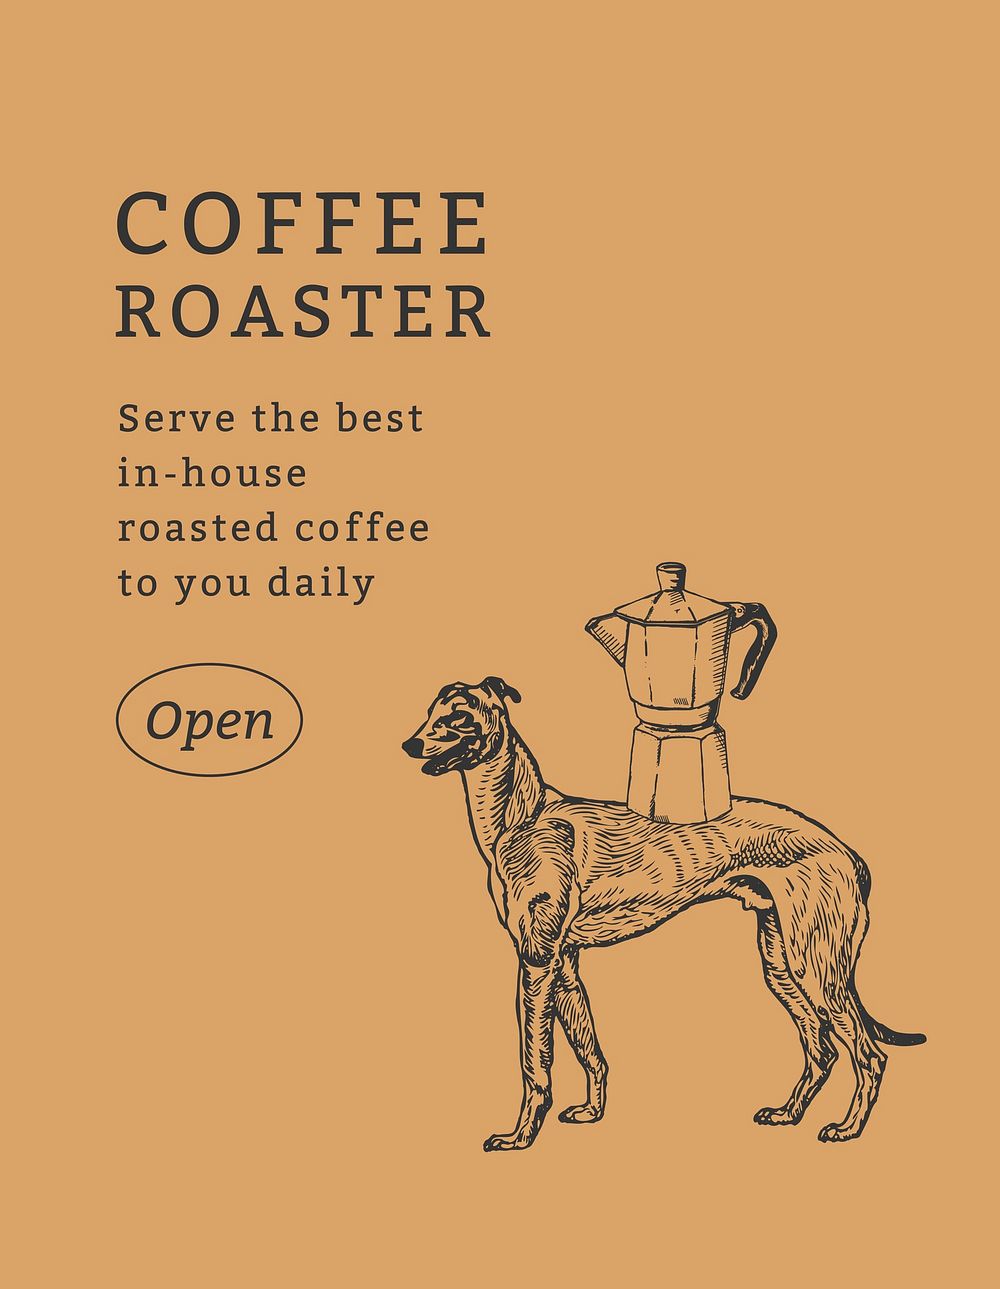 Coffee shop flyer template vector in vintage dog illustration theme, remixed from artworks by Moriz Jung